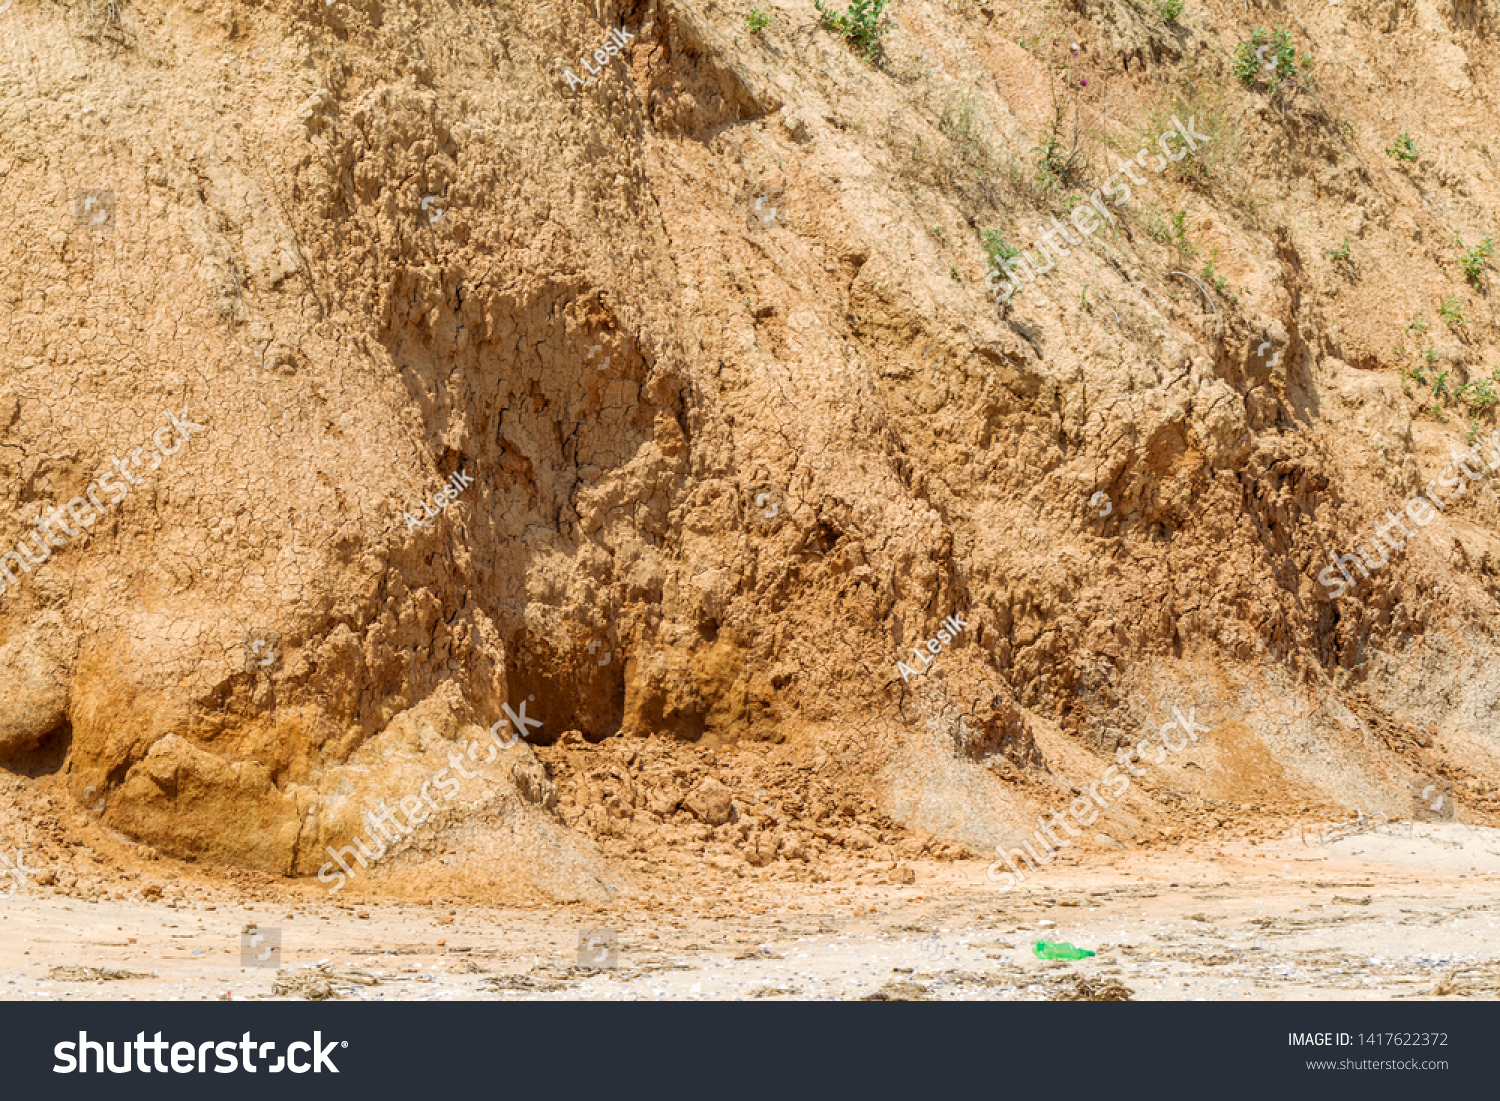 Landslide zone on Black Sea coast. Rock of sea rock shell. Zone of natural disasters during rainy season. Large masses of earth slip along slope of hill, destroy houses. Landslide - threat to life #1417622372